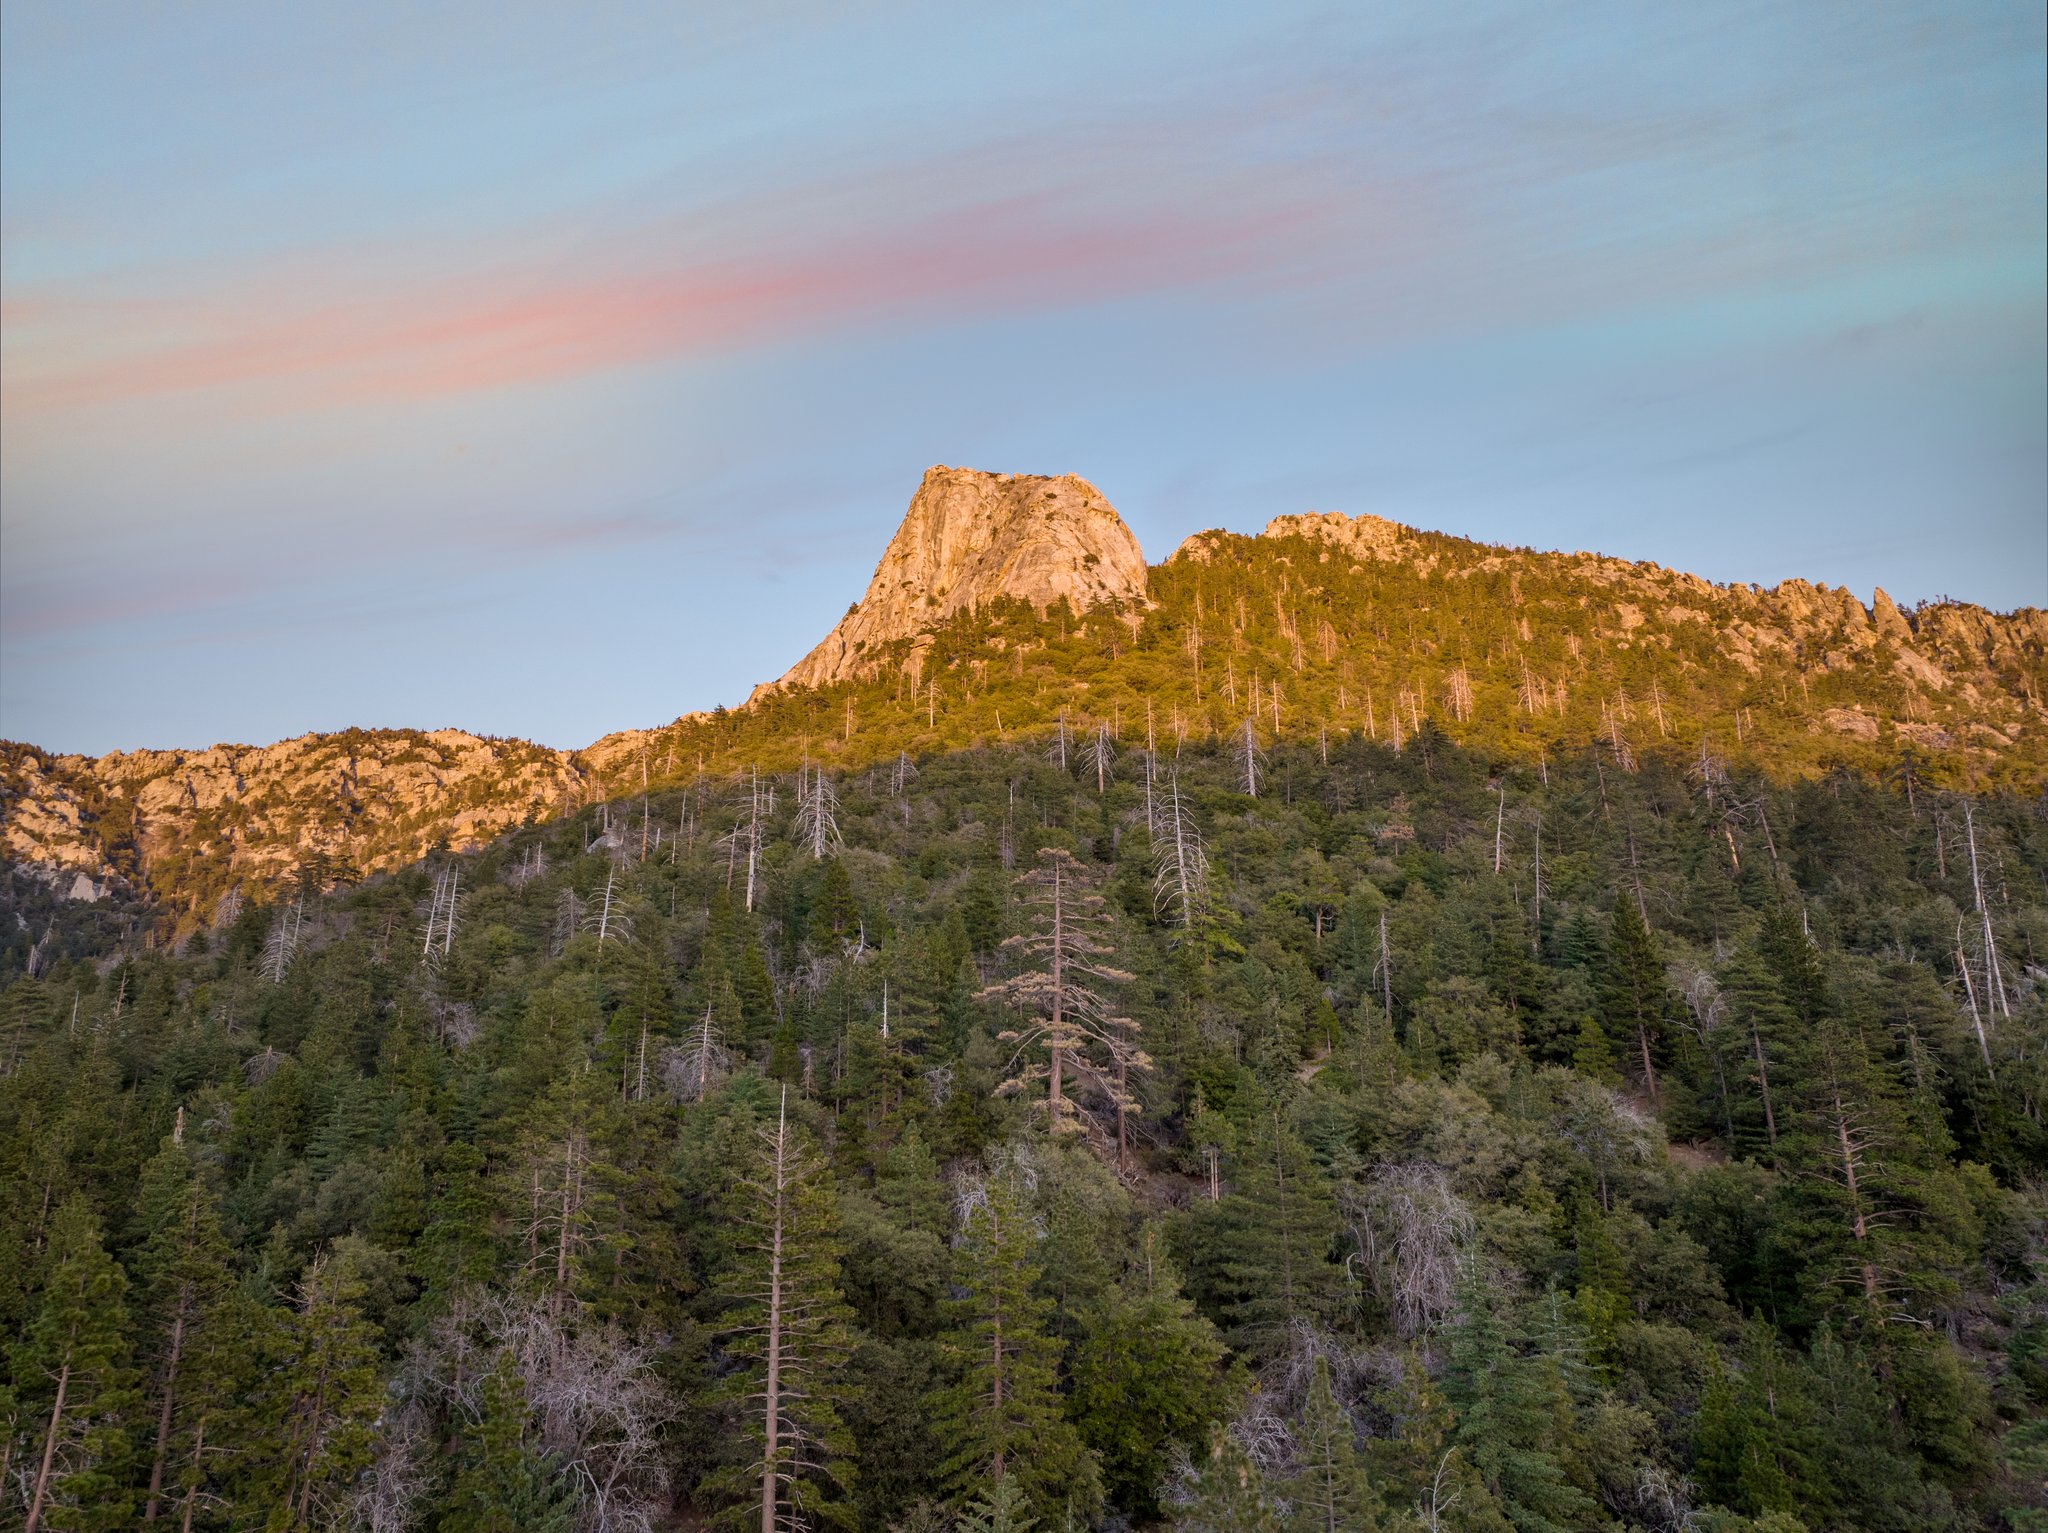 Tahquitz Rock, a.k.a. Lily Rock